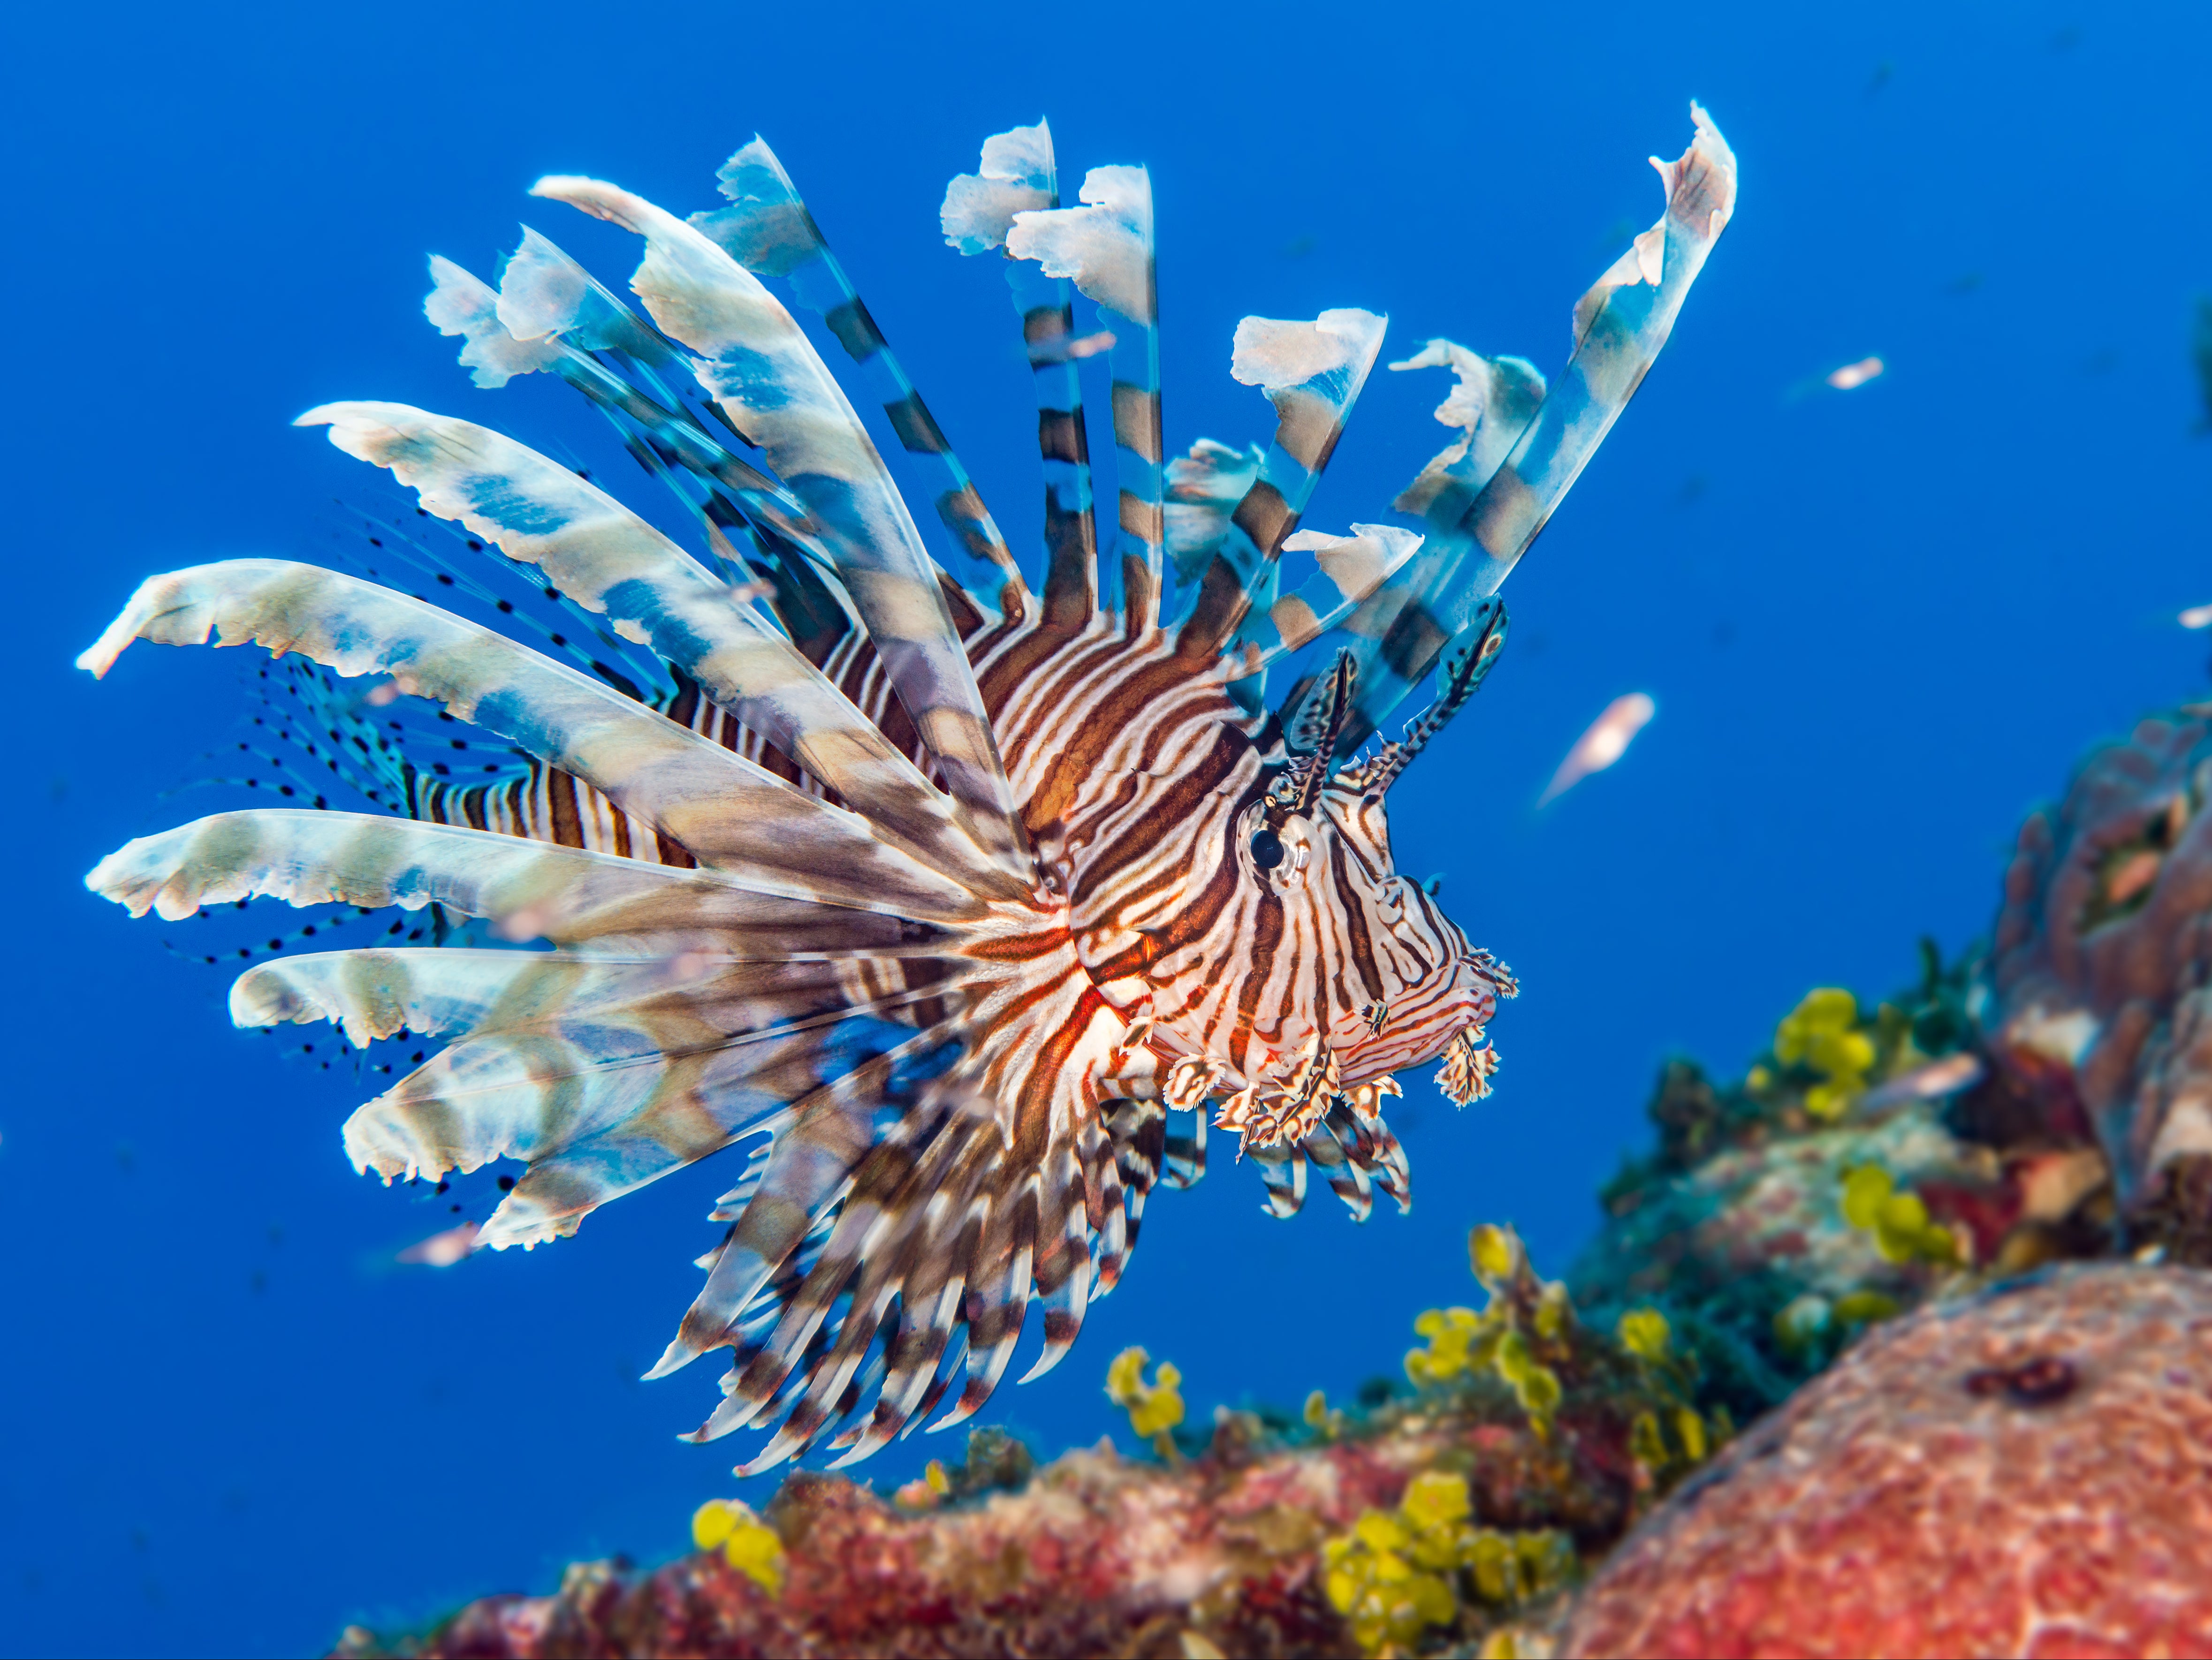 A string of ‘zoochosis’ instances have recently been reported, including a lionfish that was seen floating abnormally